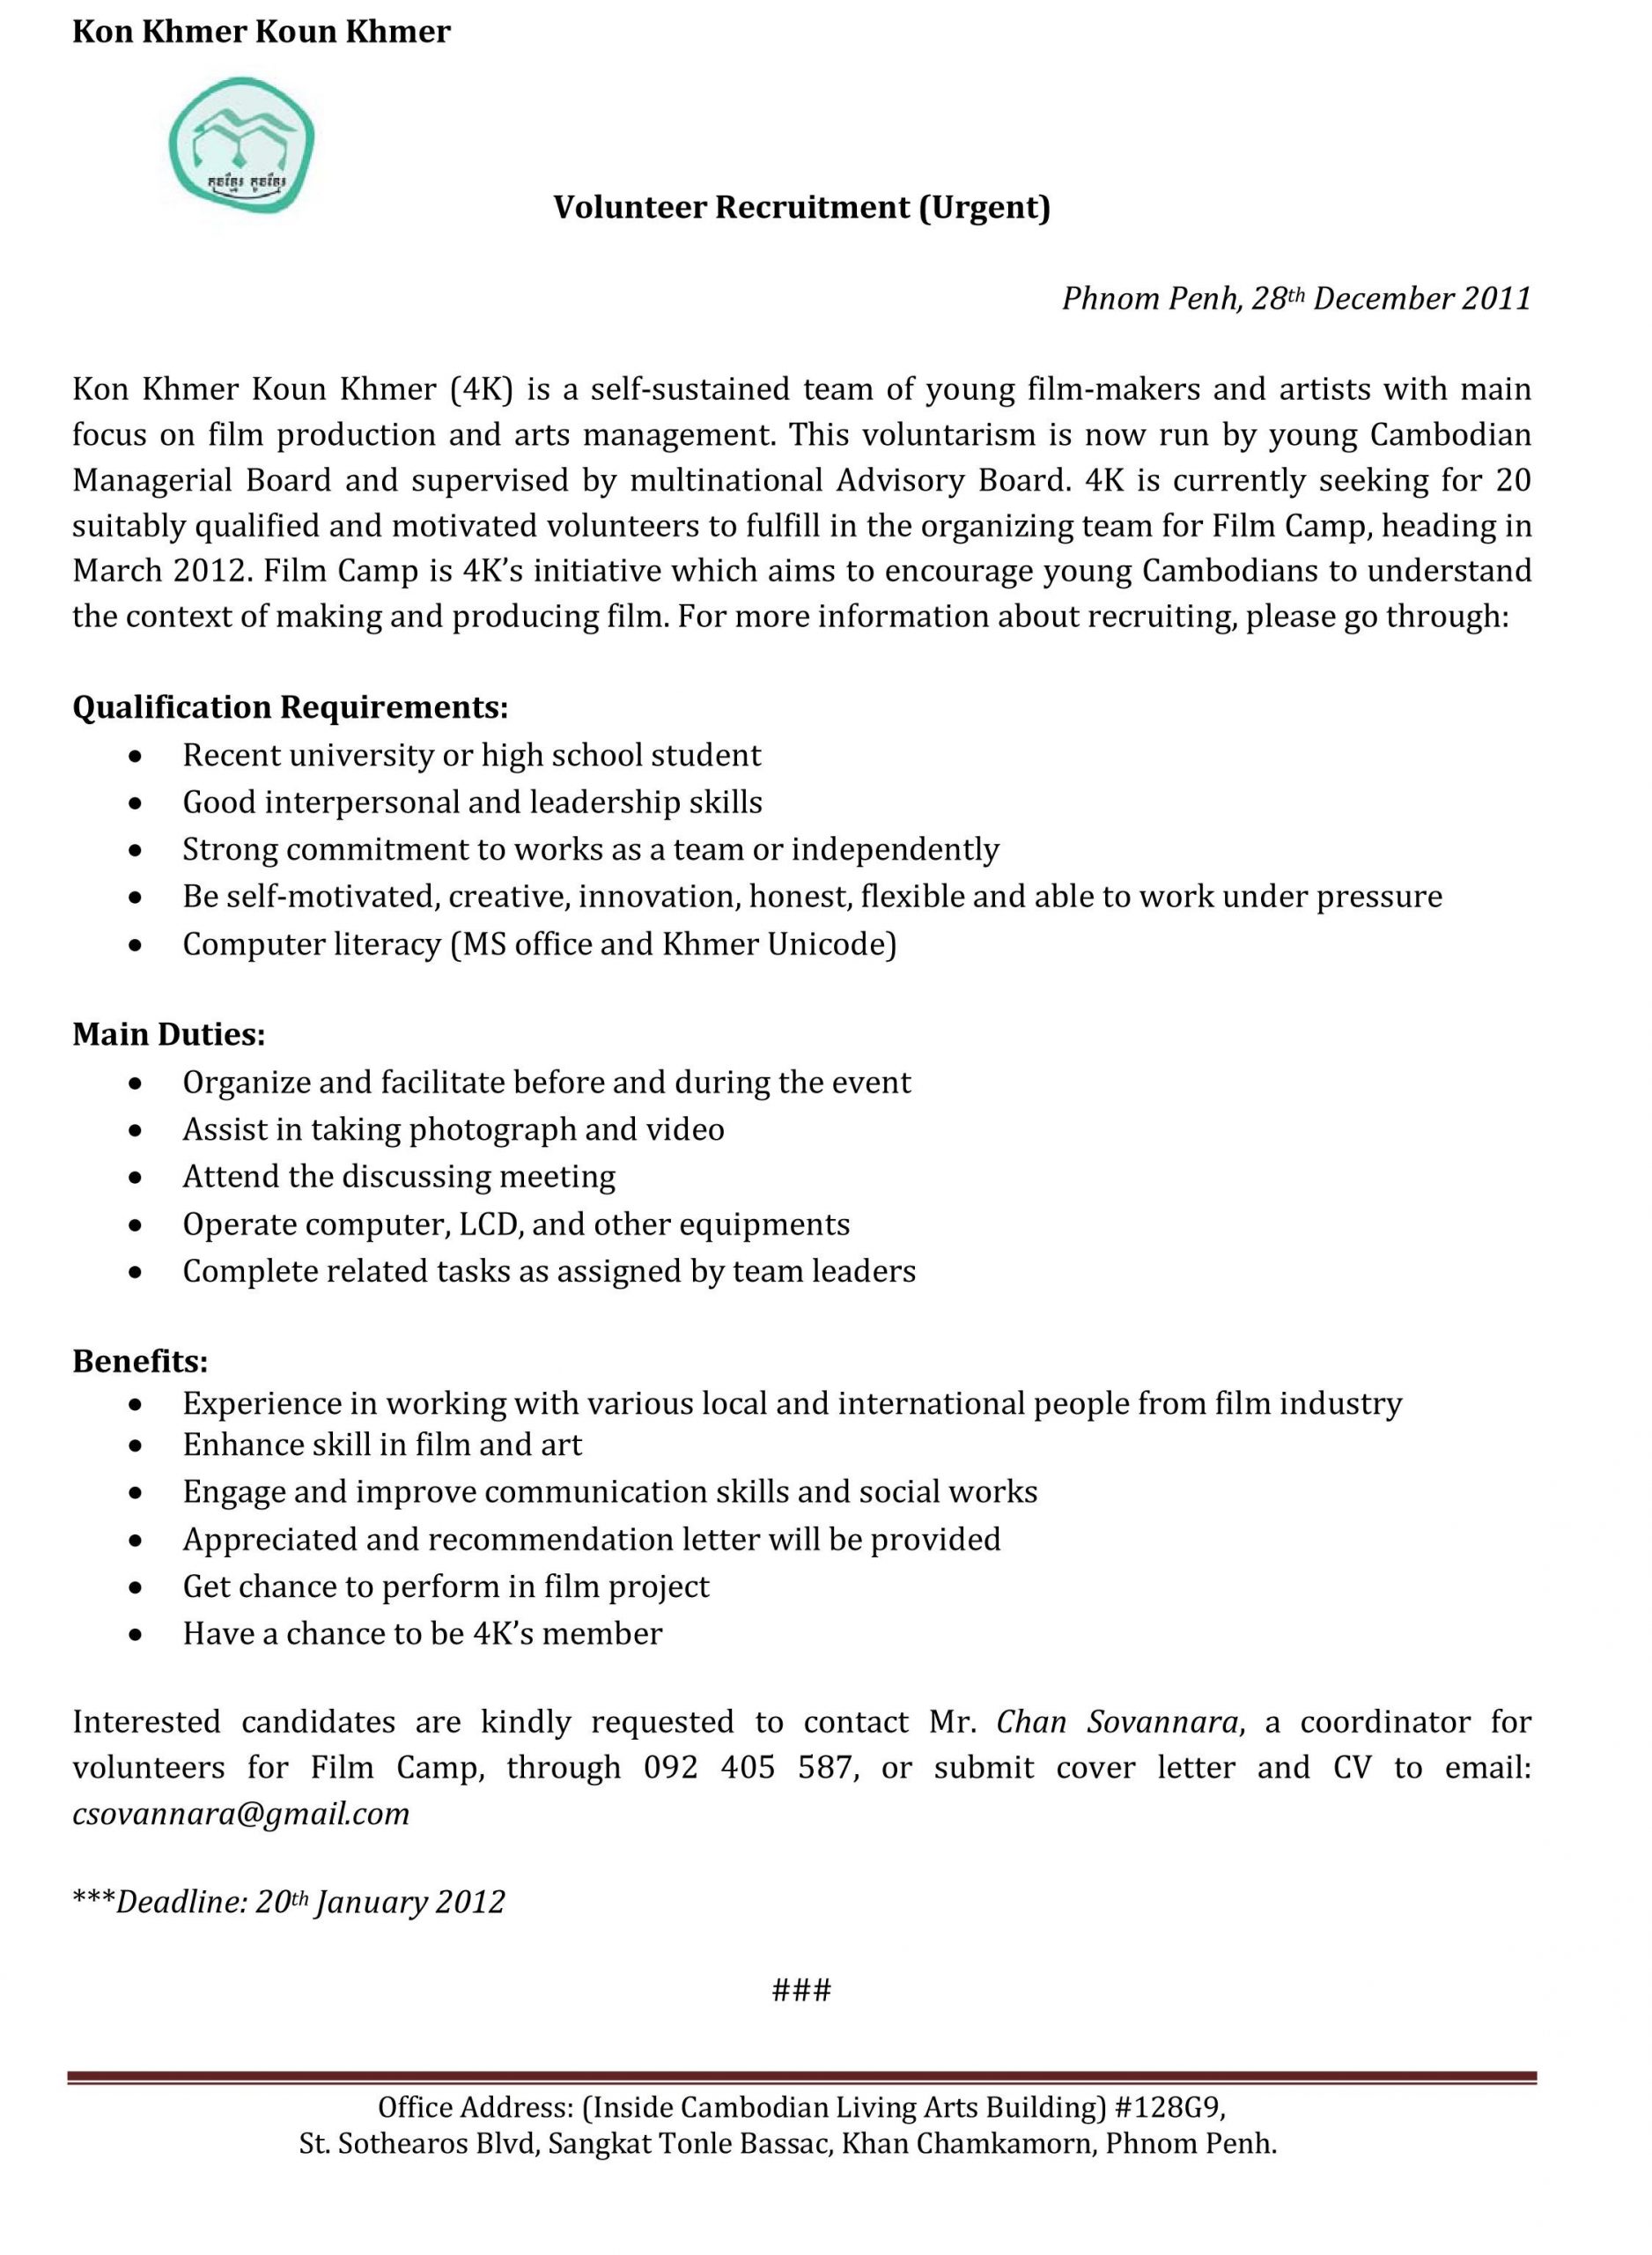 Sample Application Letter For Volunteer Position throughout sizing 2248 X 3067